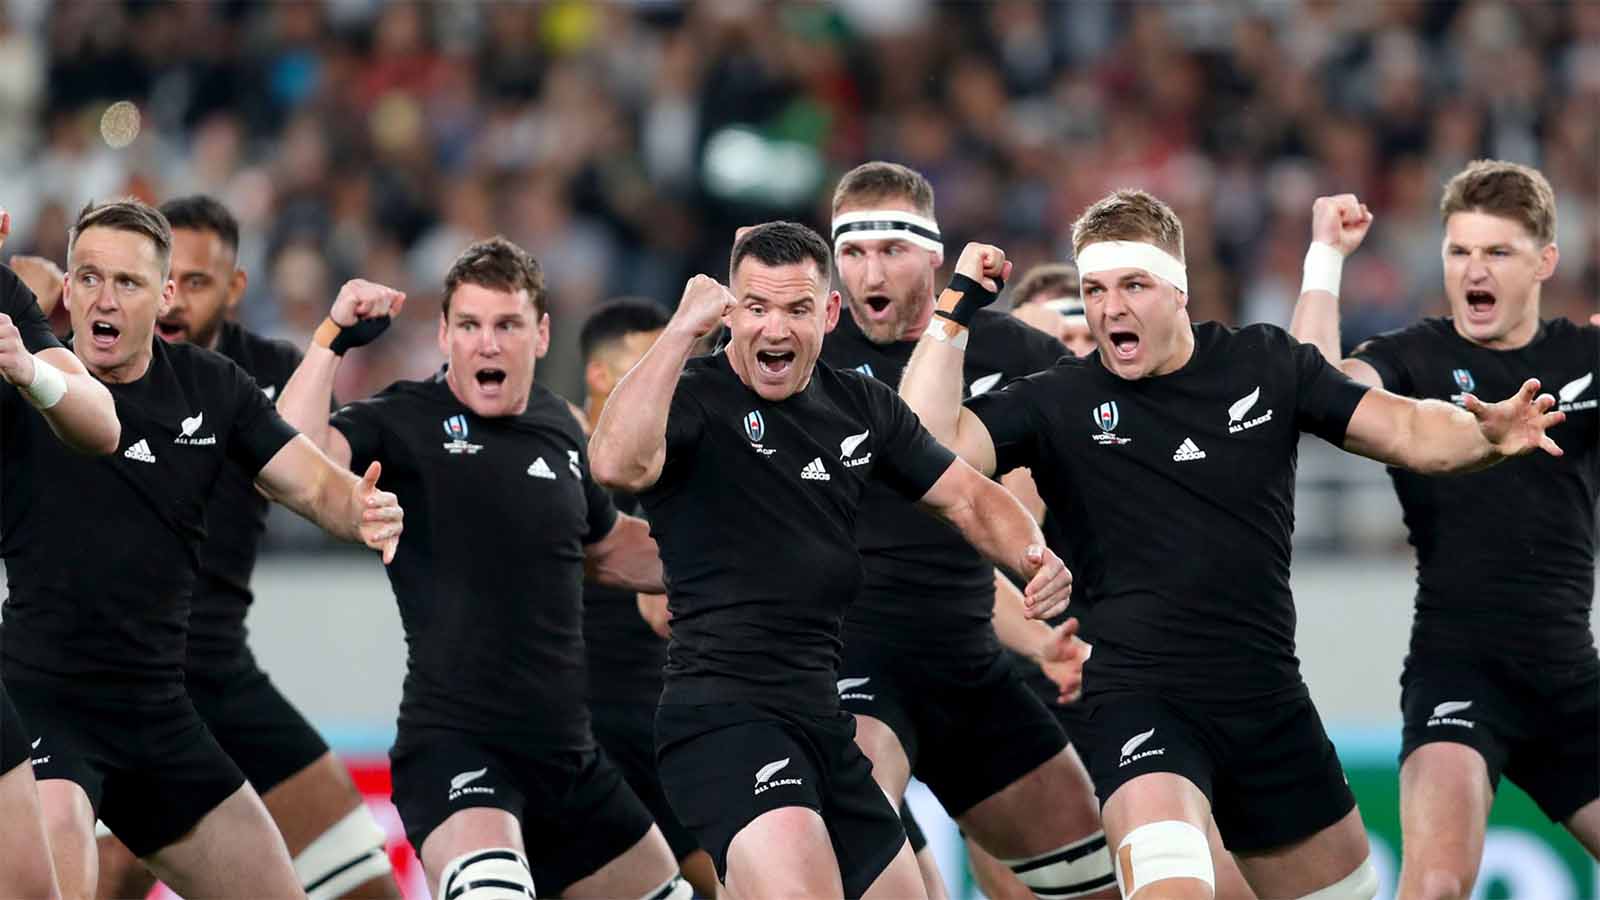 New Zealand rugby team players